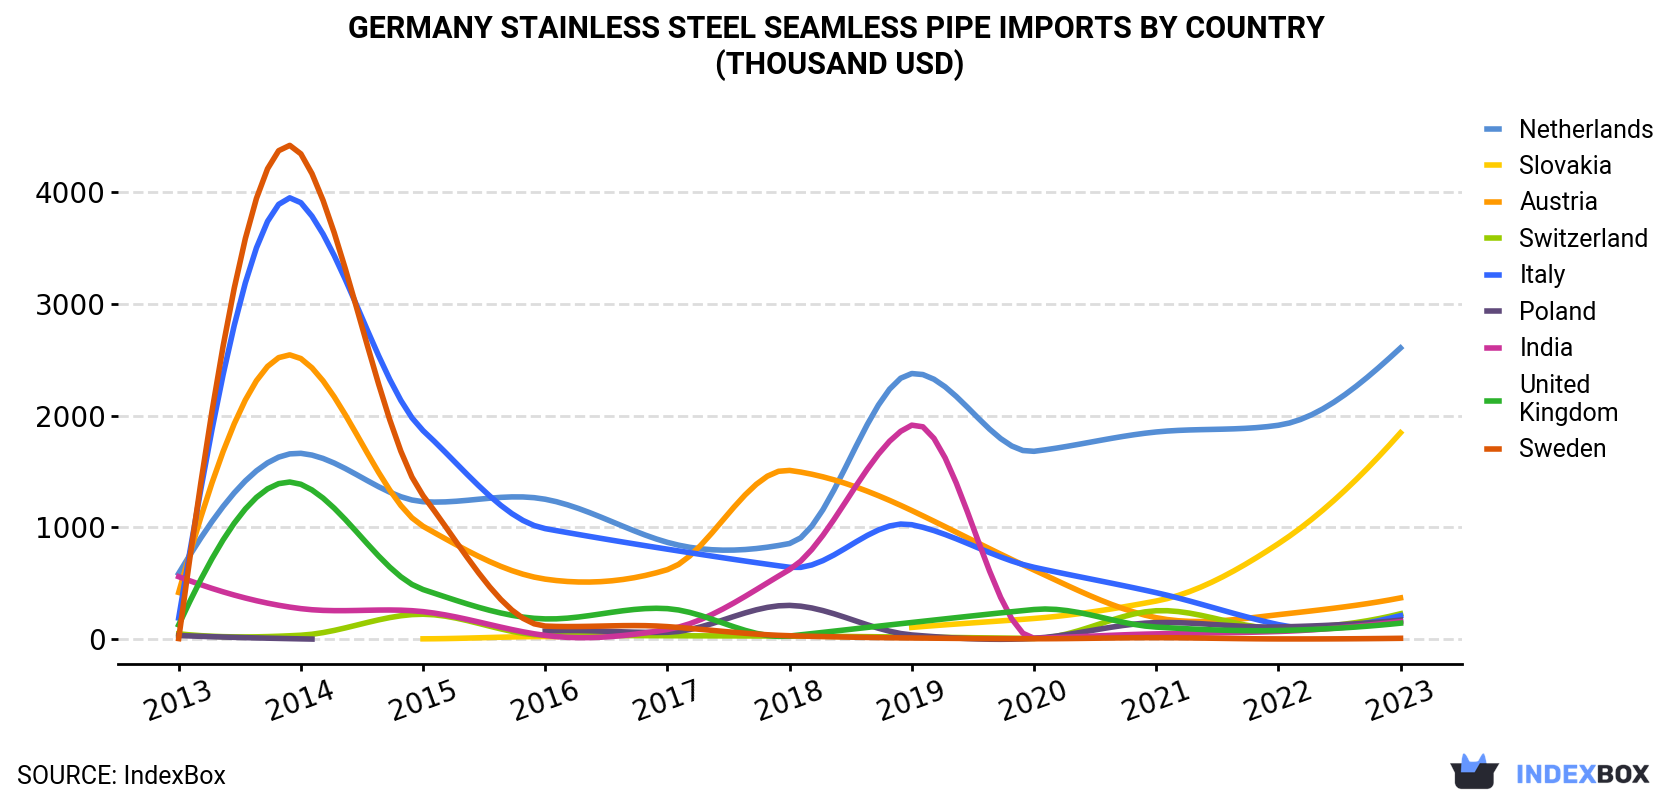 Germany Stainless Steel Seamless Pipe Imports By Country (Thousand USD)